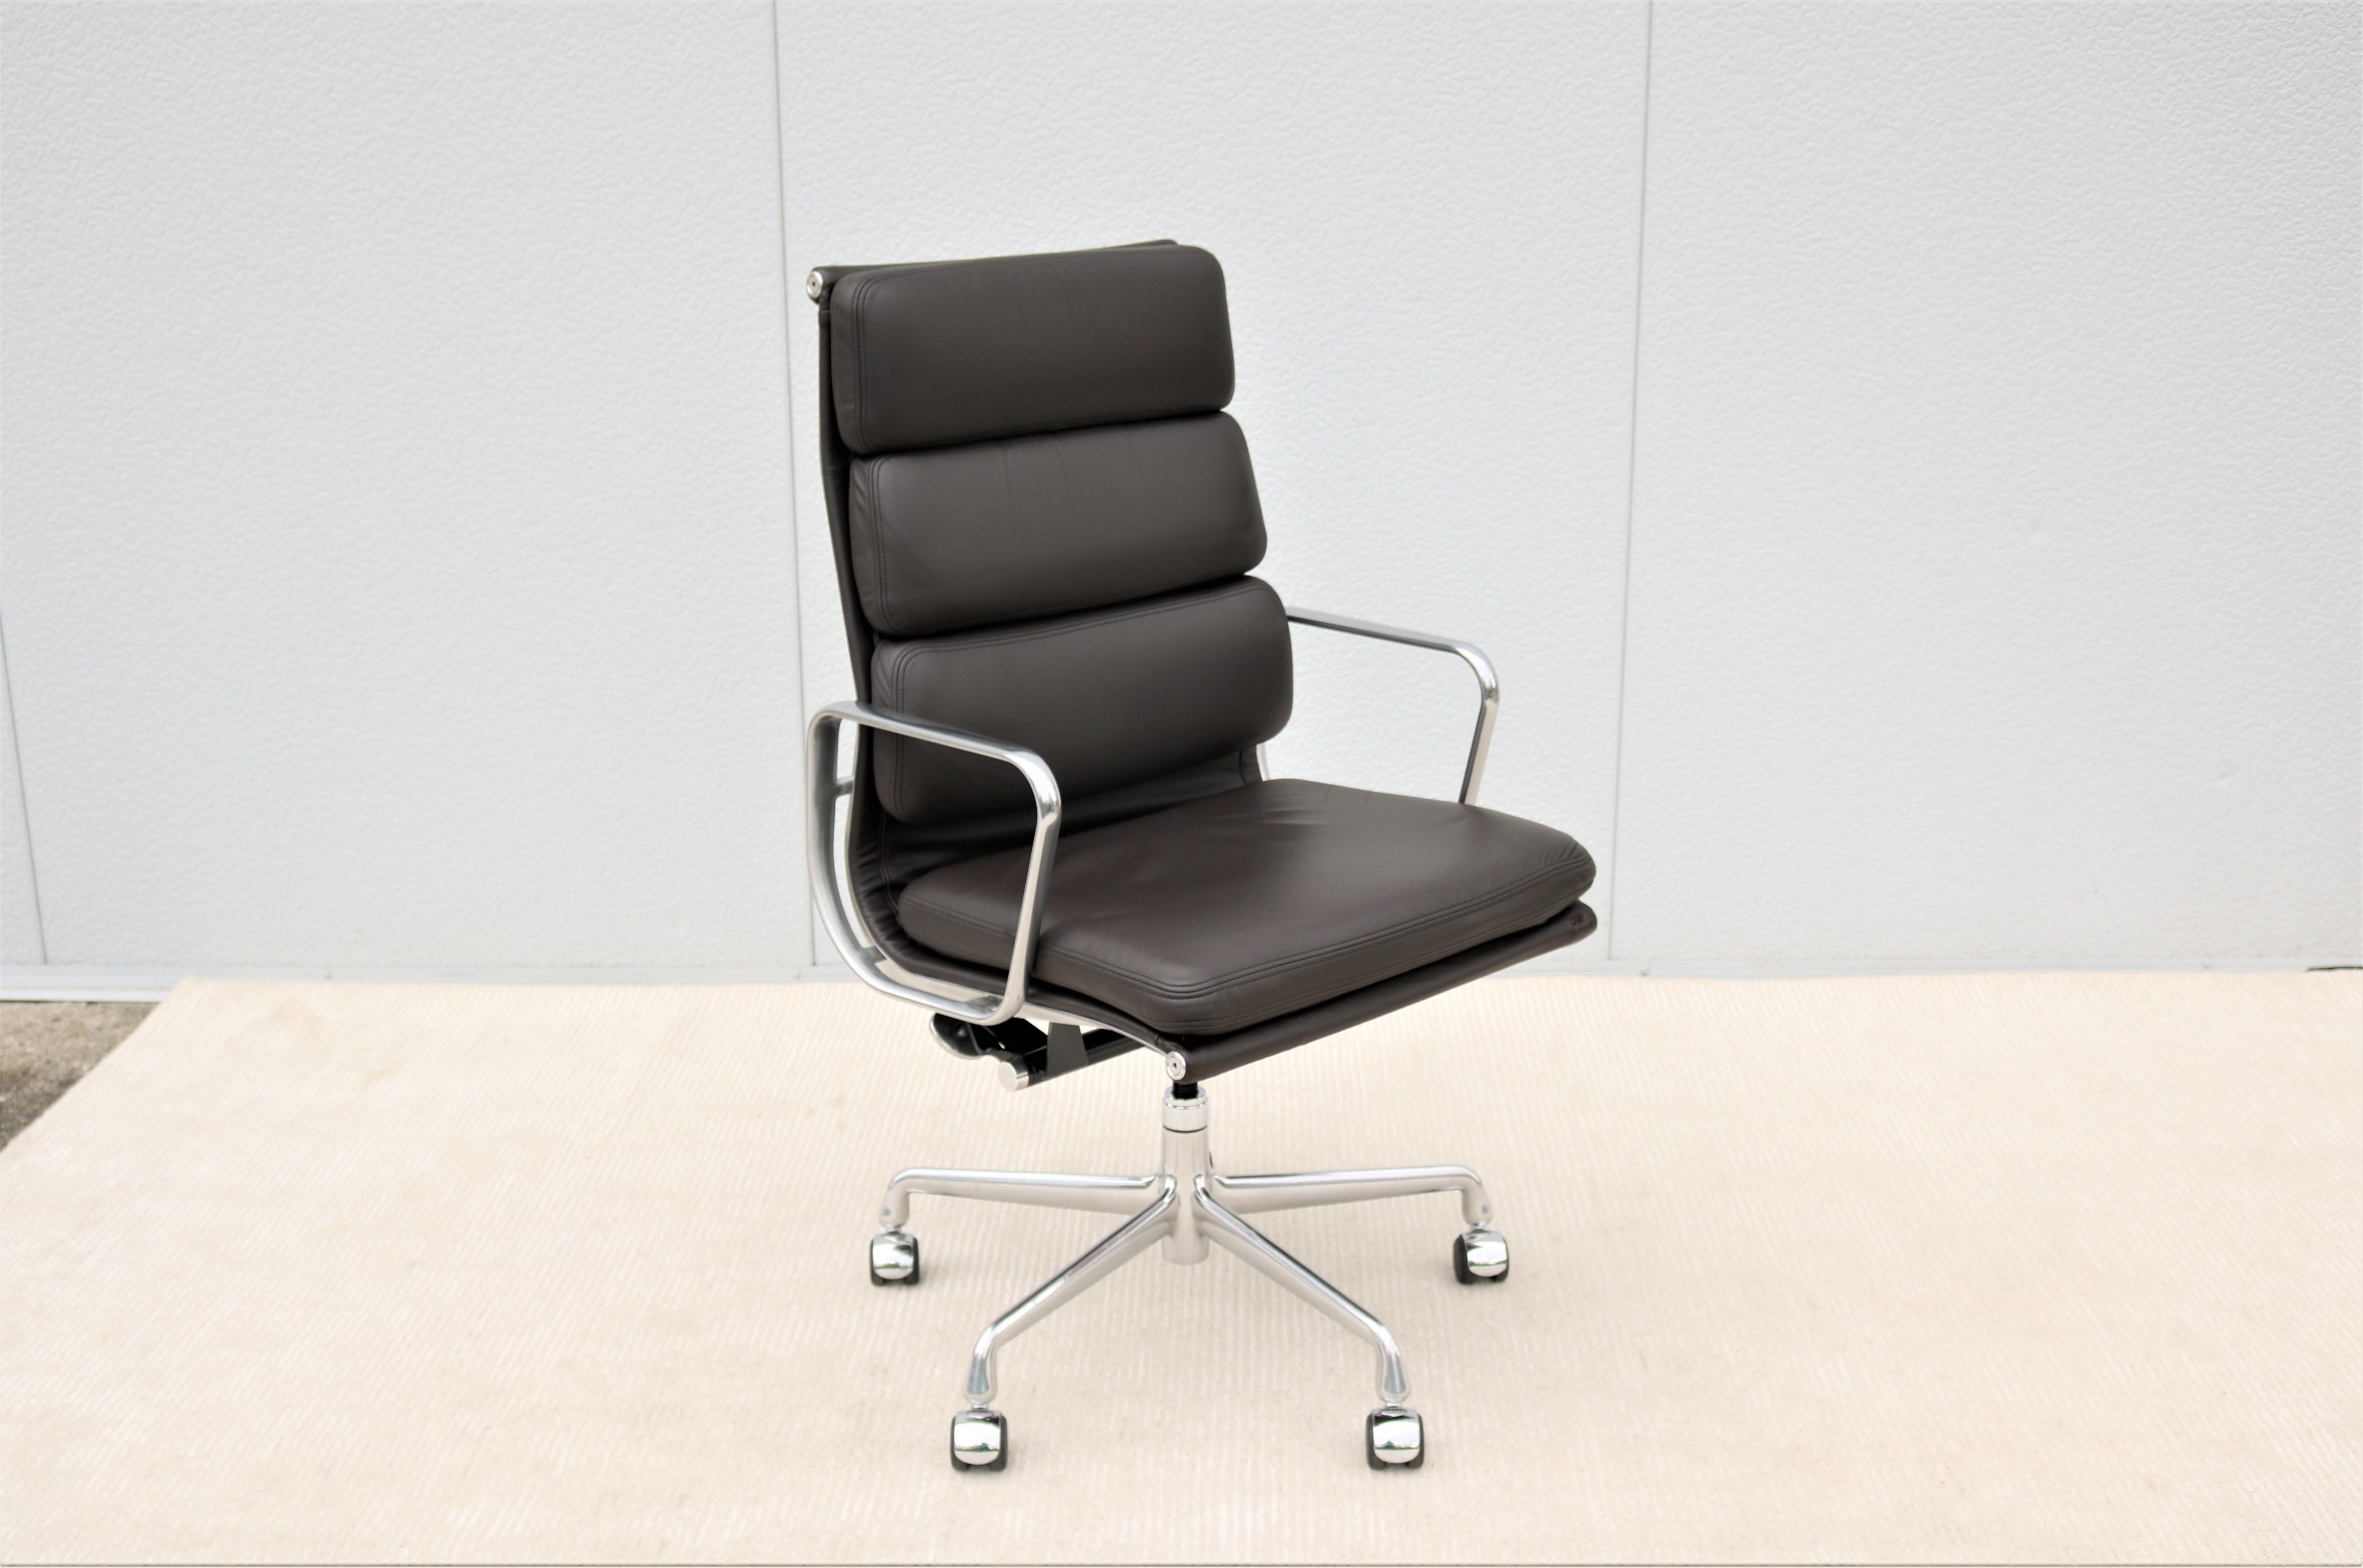 Stunning authentic Mid-Century Modern Eames soft pad high-back executive chair. 
A timeless design classic and contemporary with innovative comfort features.
One of Herman Miller most popular chairs was designed in 1958 by Charles and Ray